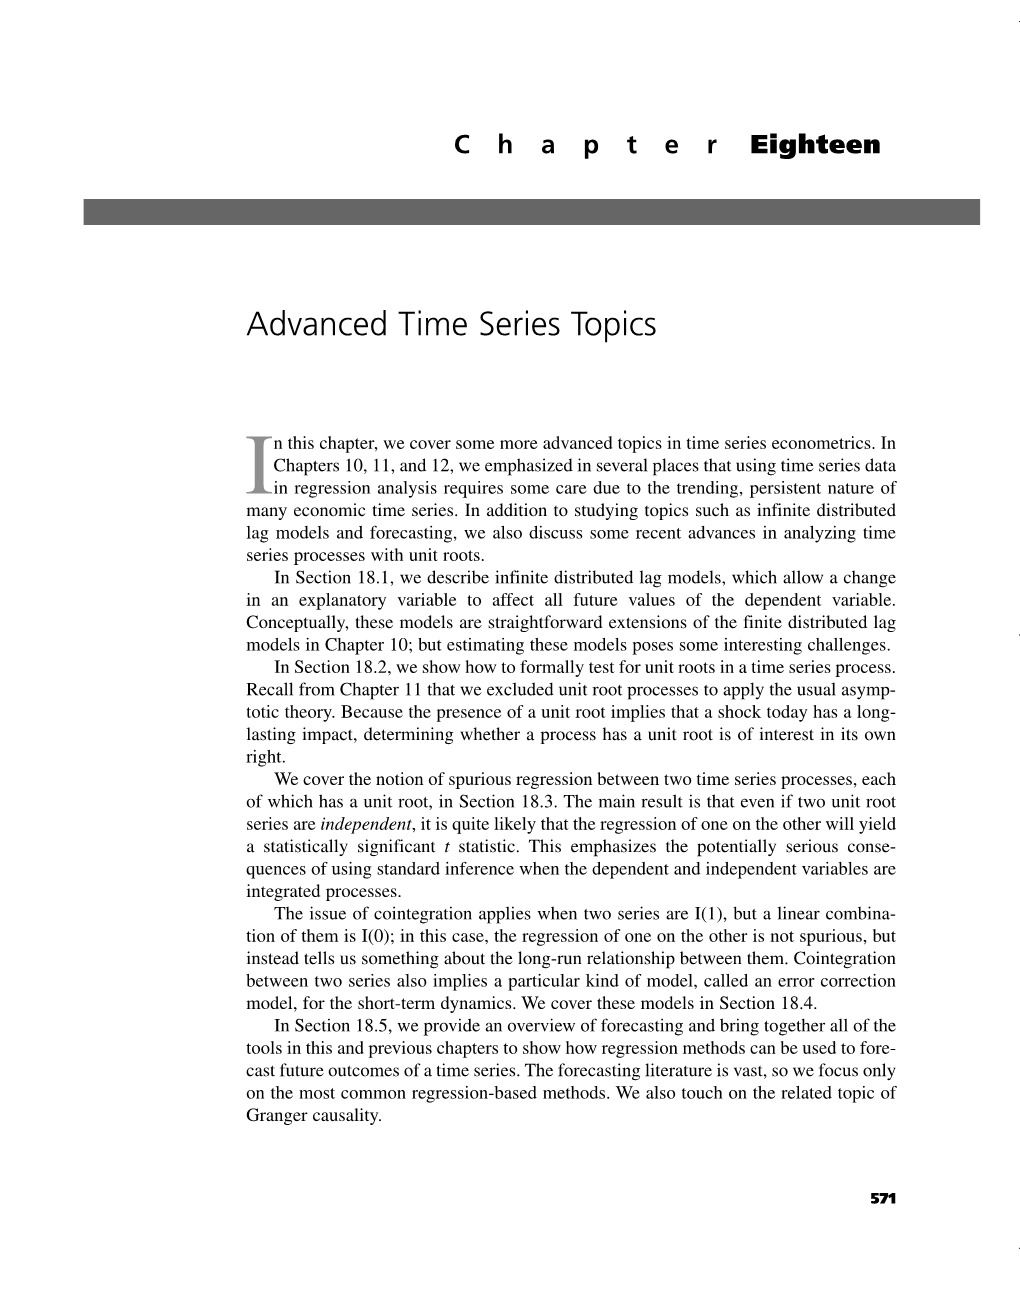 In This Chapter, We Cover Some More Advanced Topics in Time Series Econometrics. In